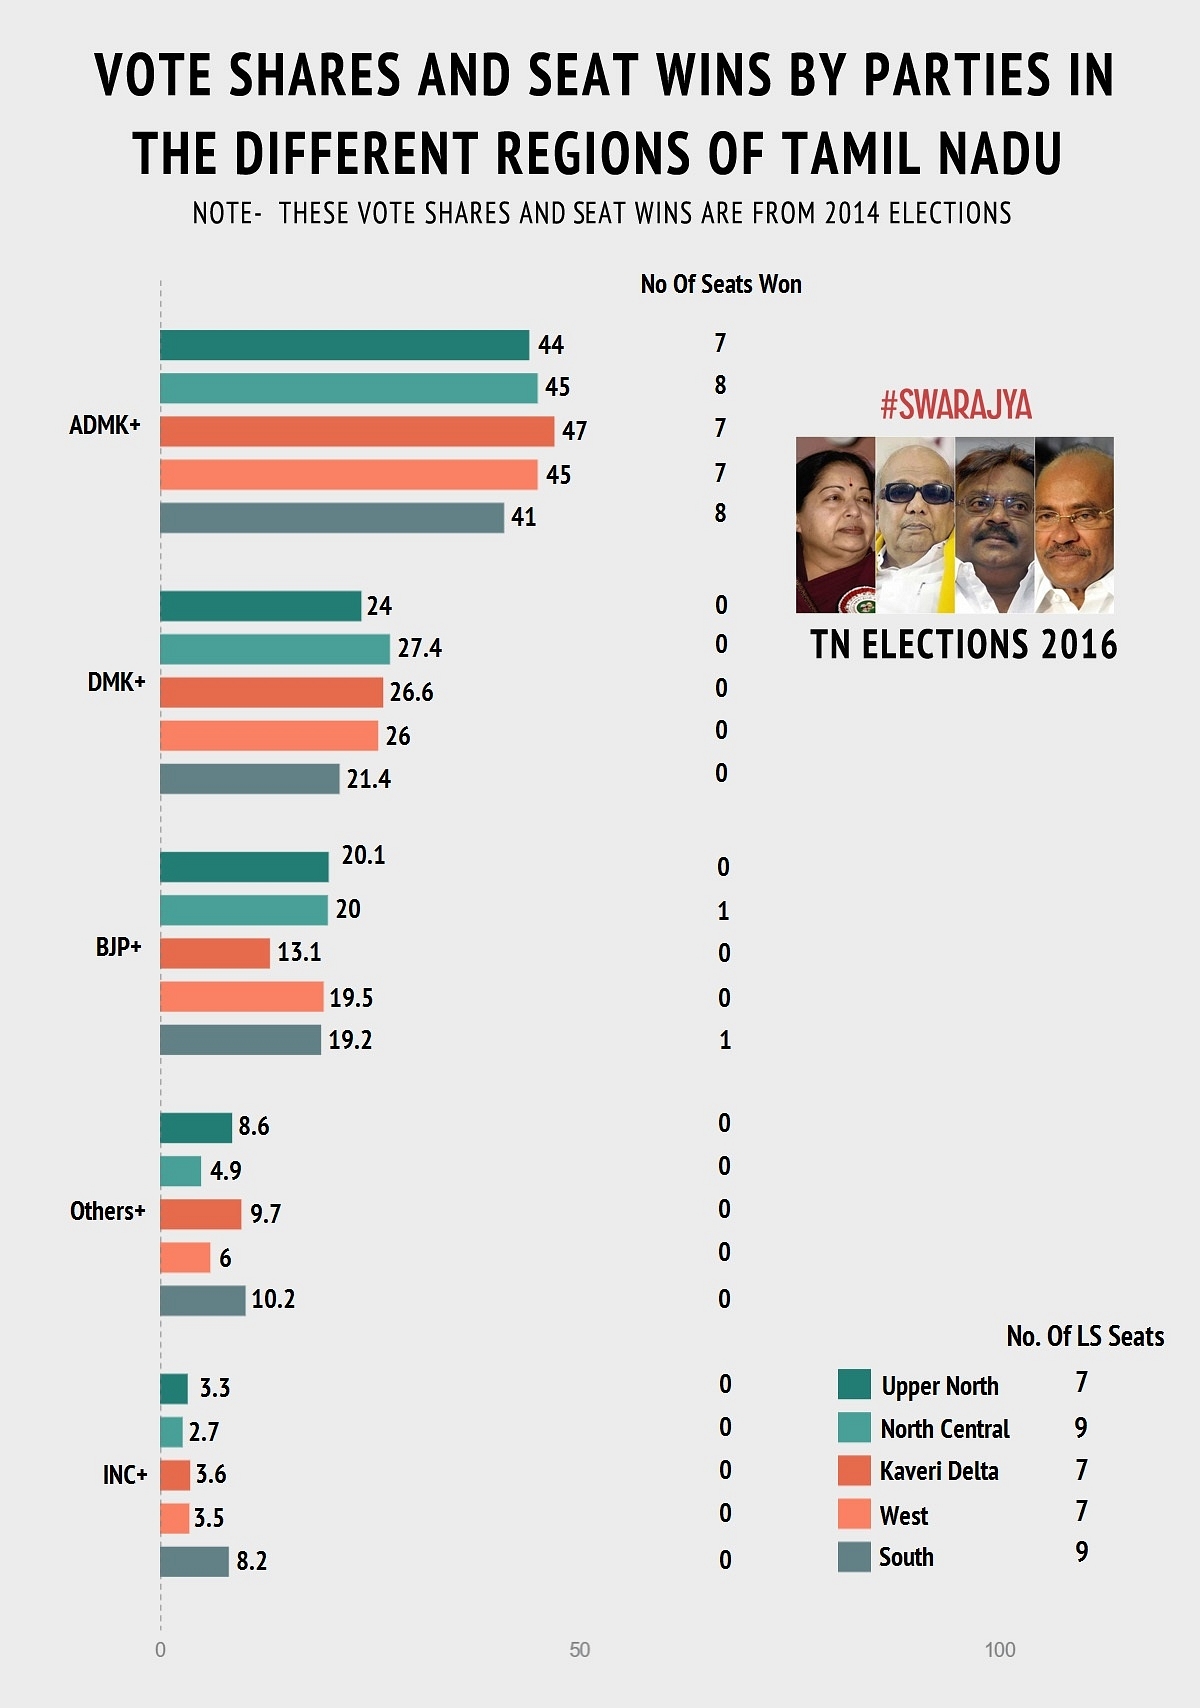 

Vote Shares and Seat Wins by parties in the different regions of Tamil Nadu in the 2014 Lok Sabha Elections